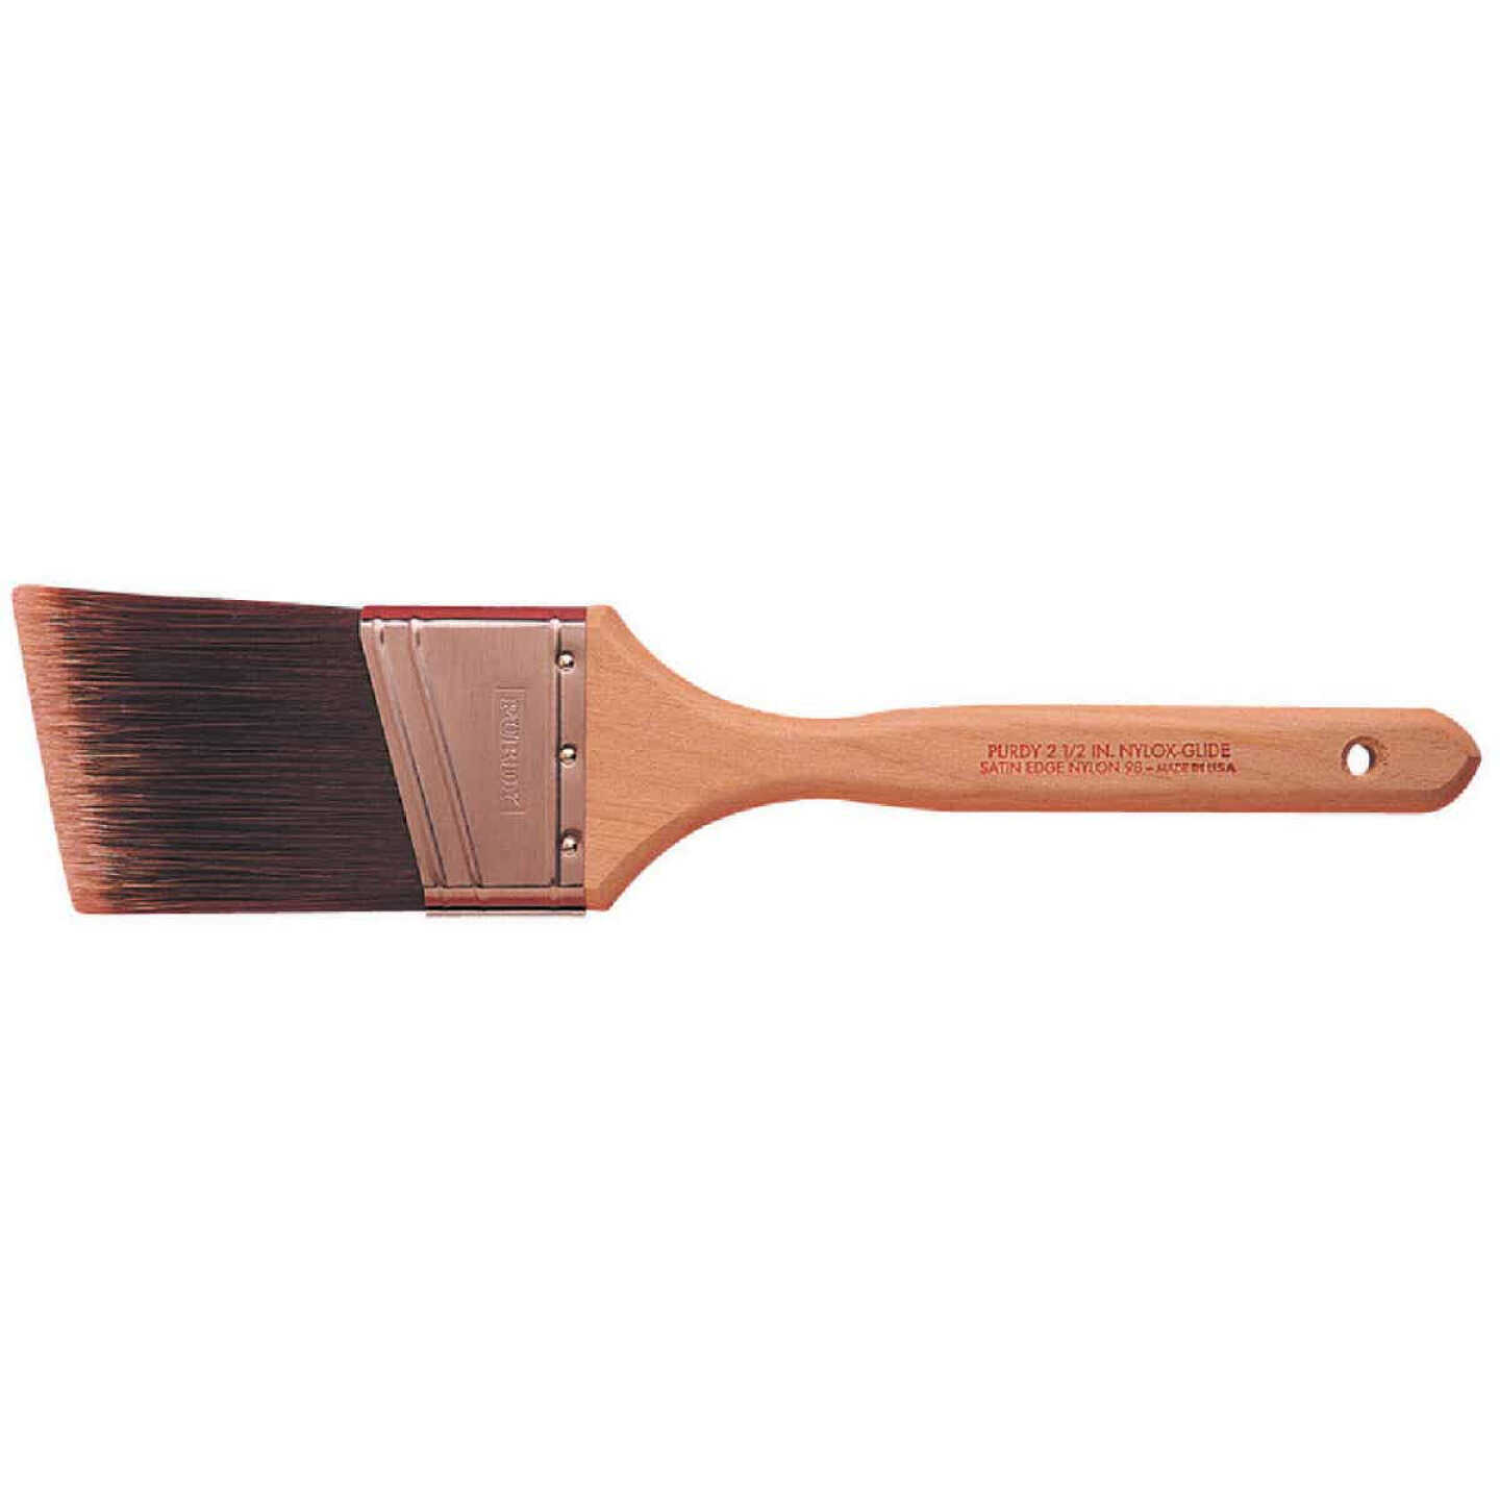 purdy 2_ angled nylox glide paint brush